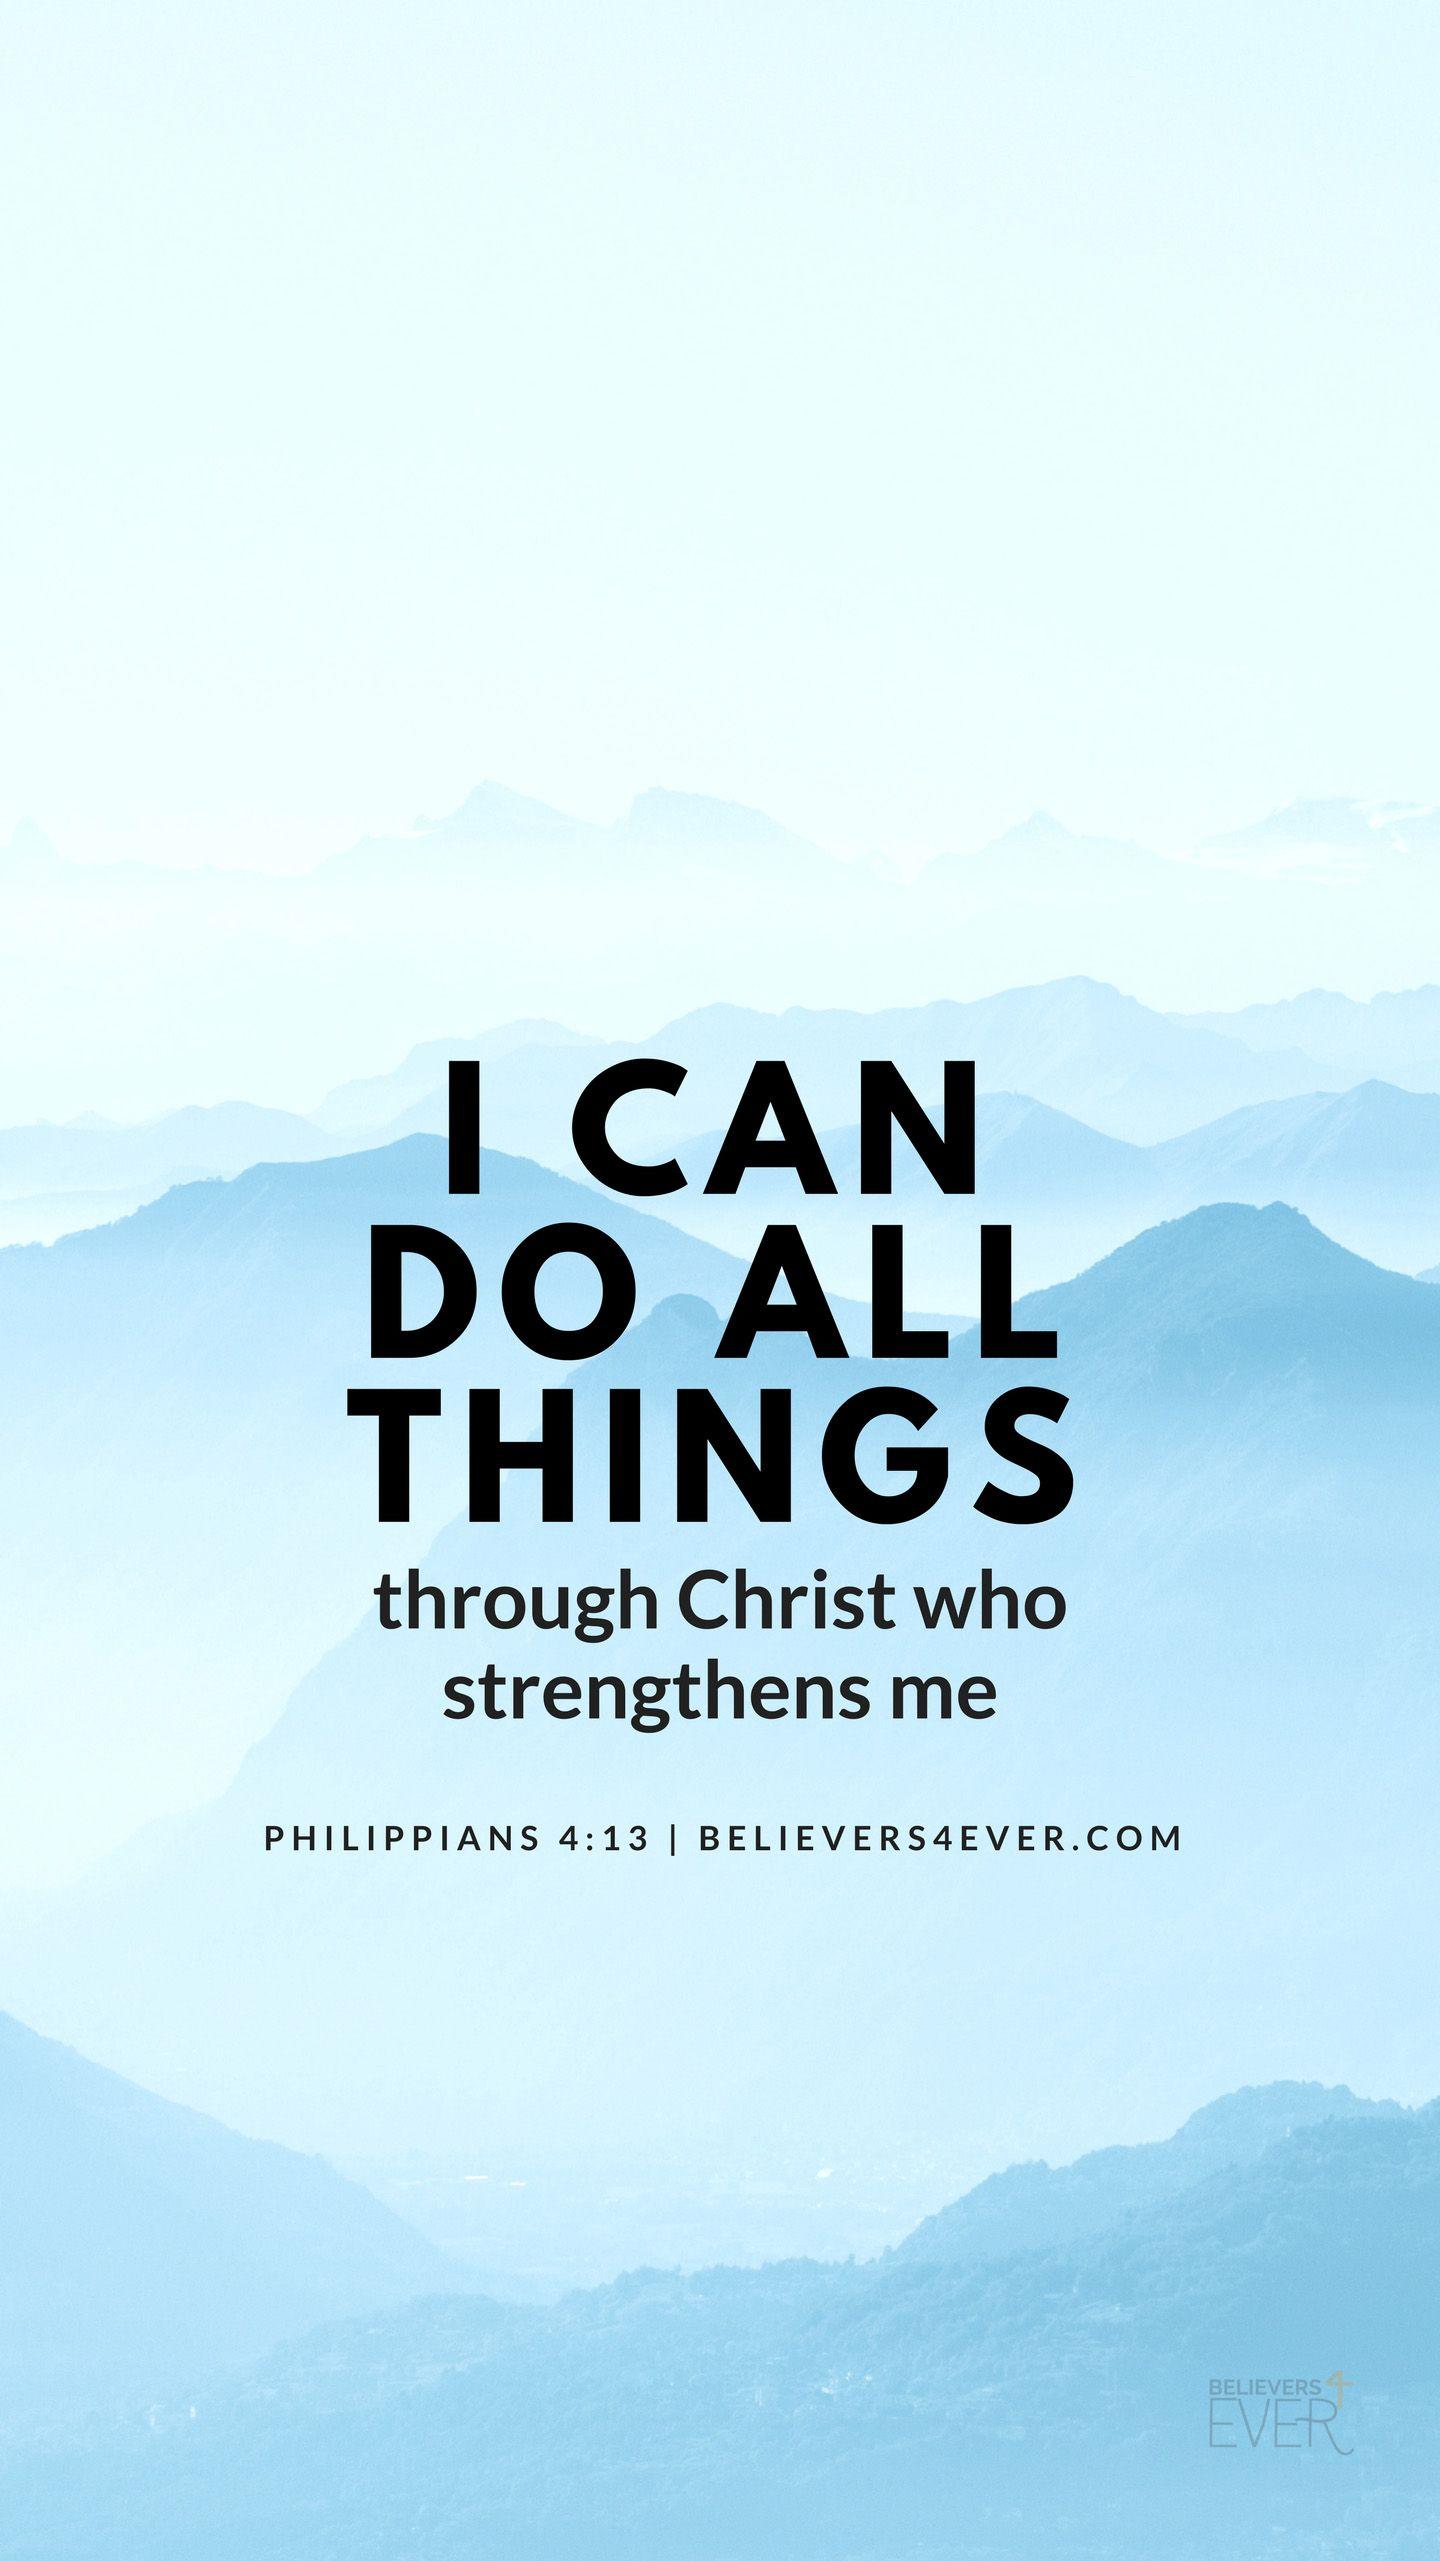 I can do all things. Bible verse wallpaper, Bible quotes